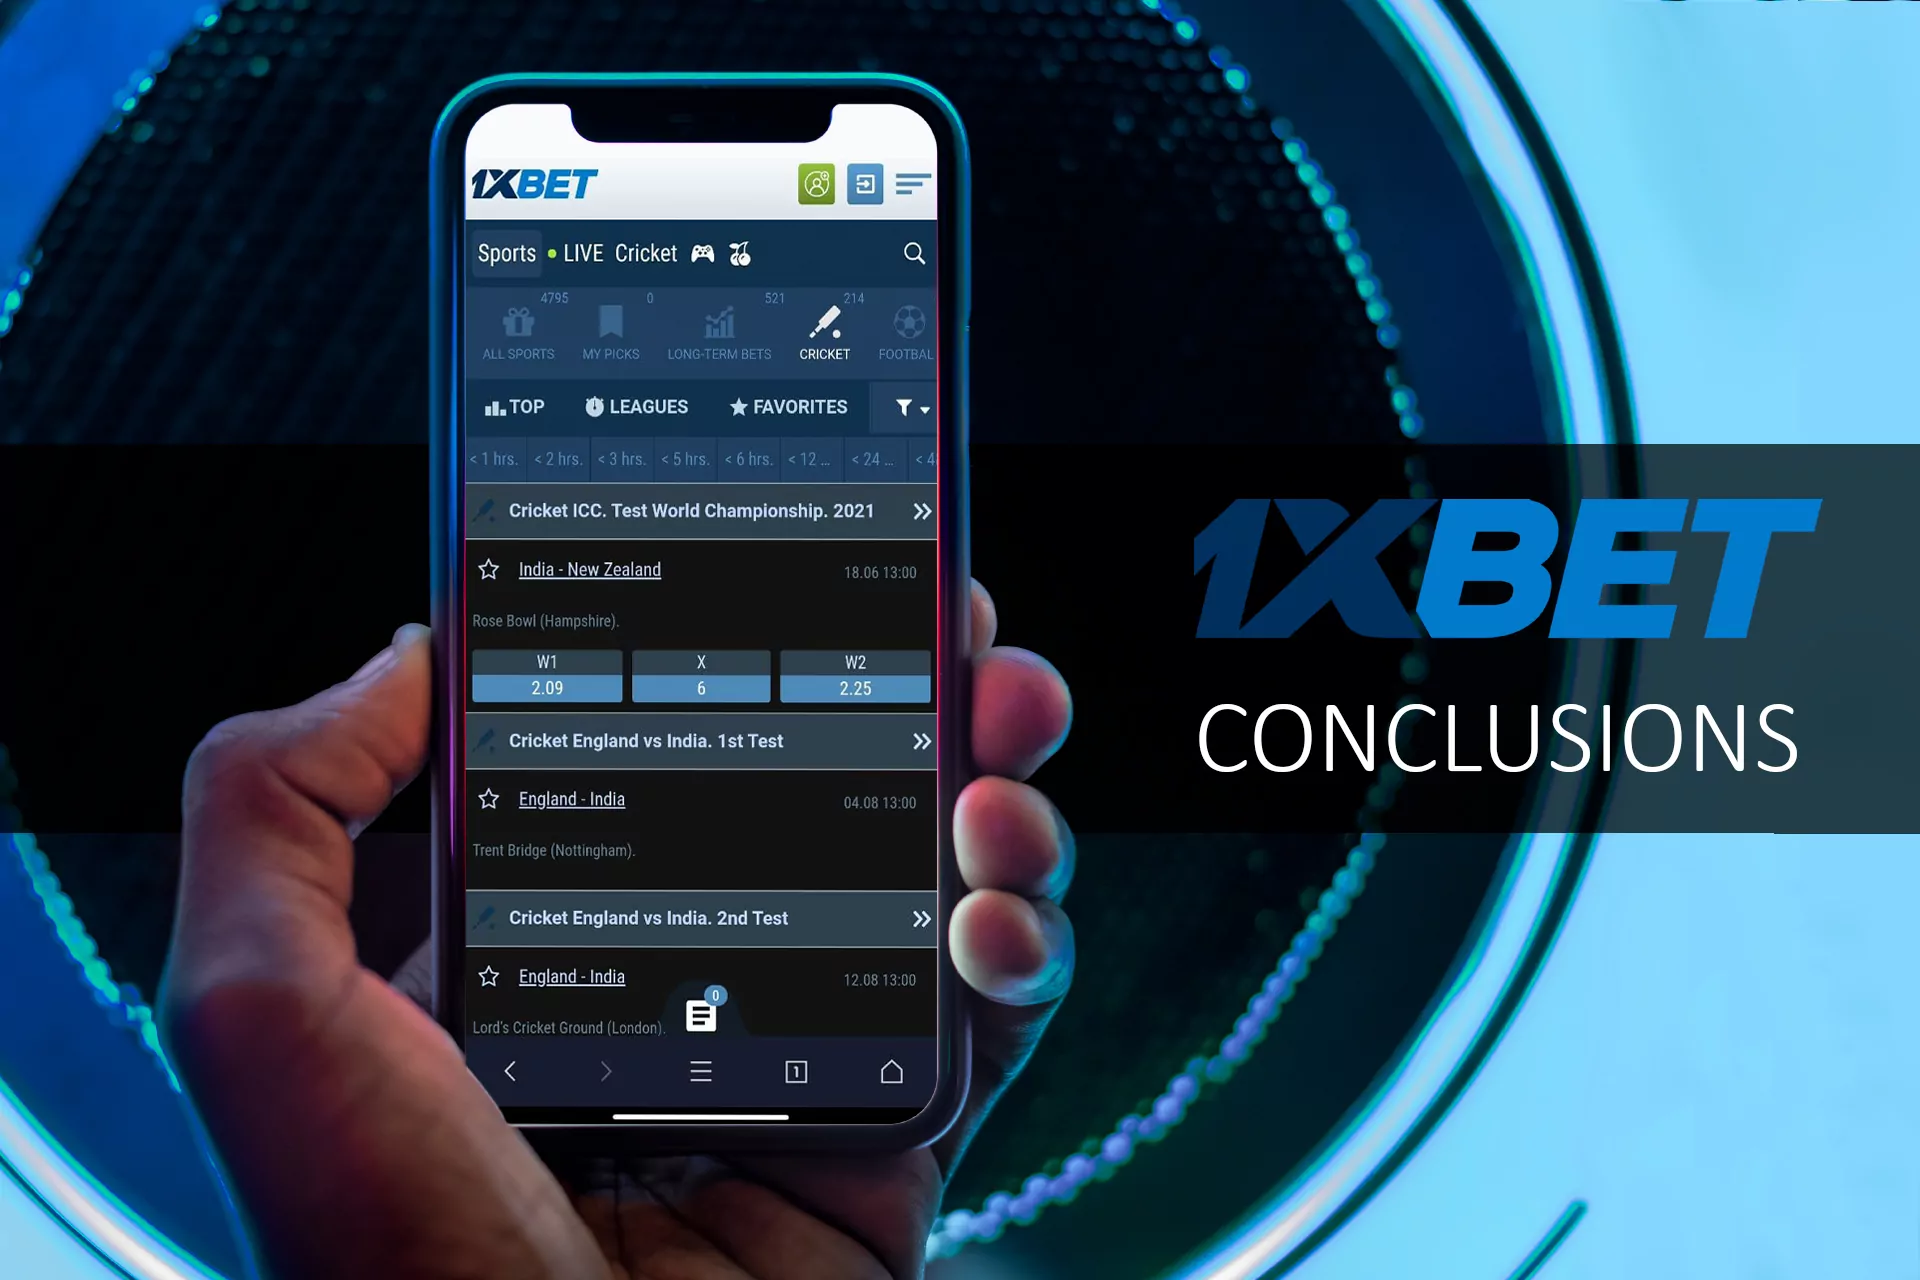 The 1xBet app is great for sports betting and casino games.